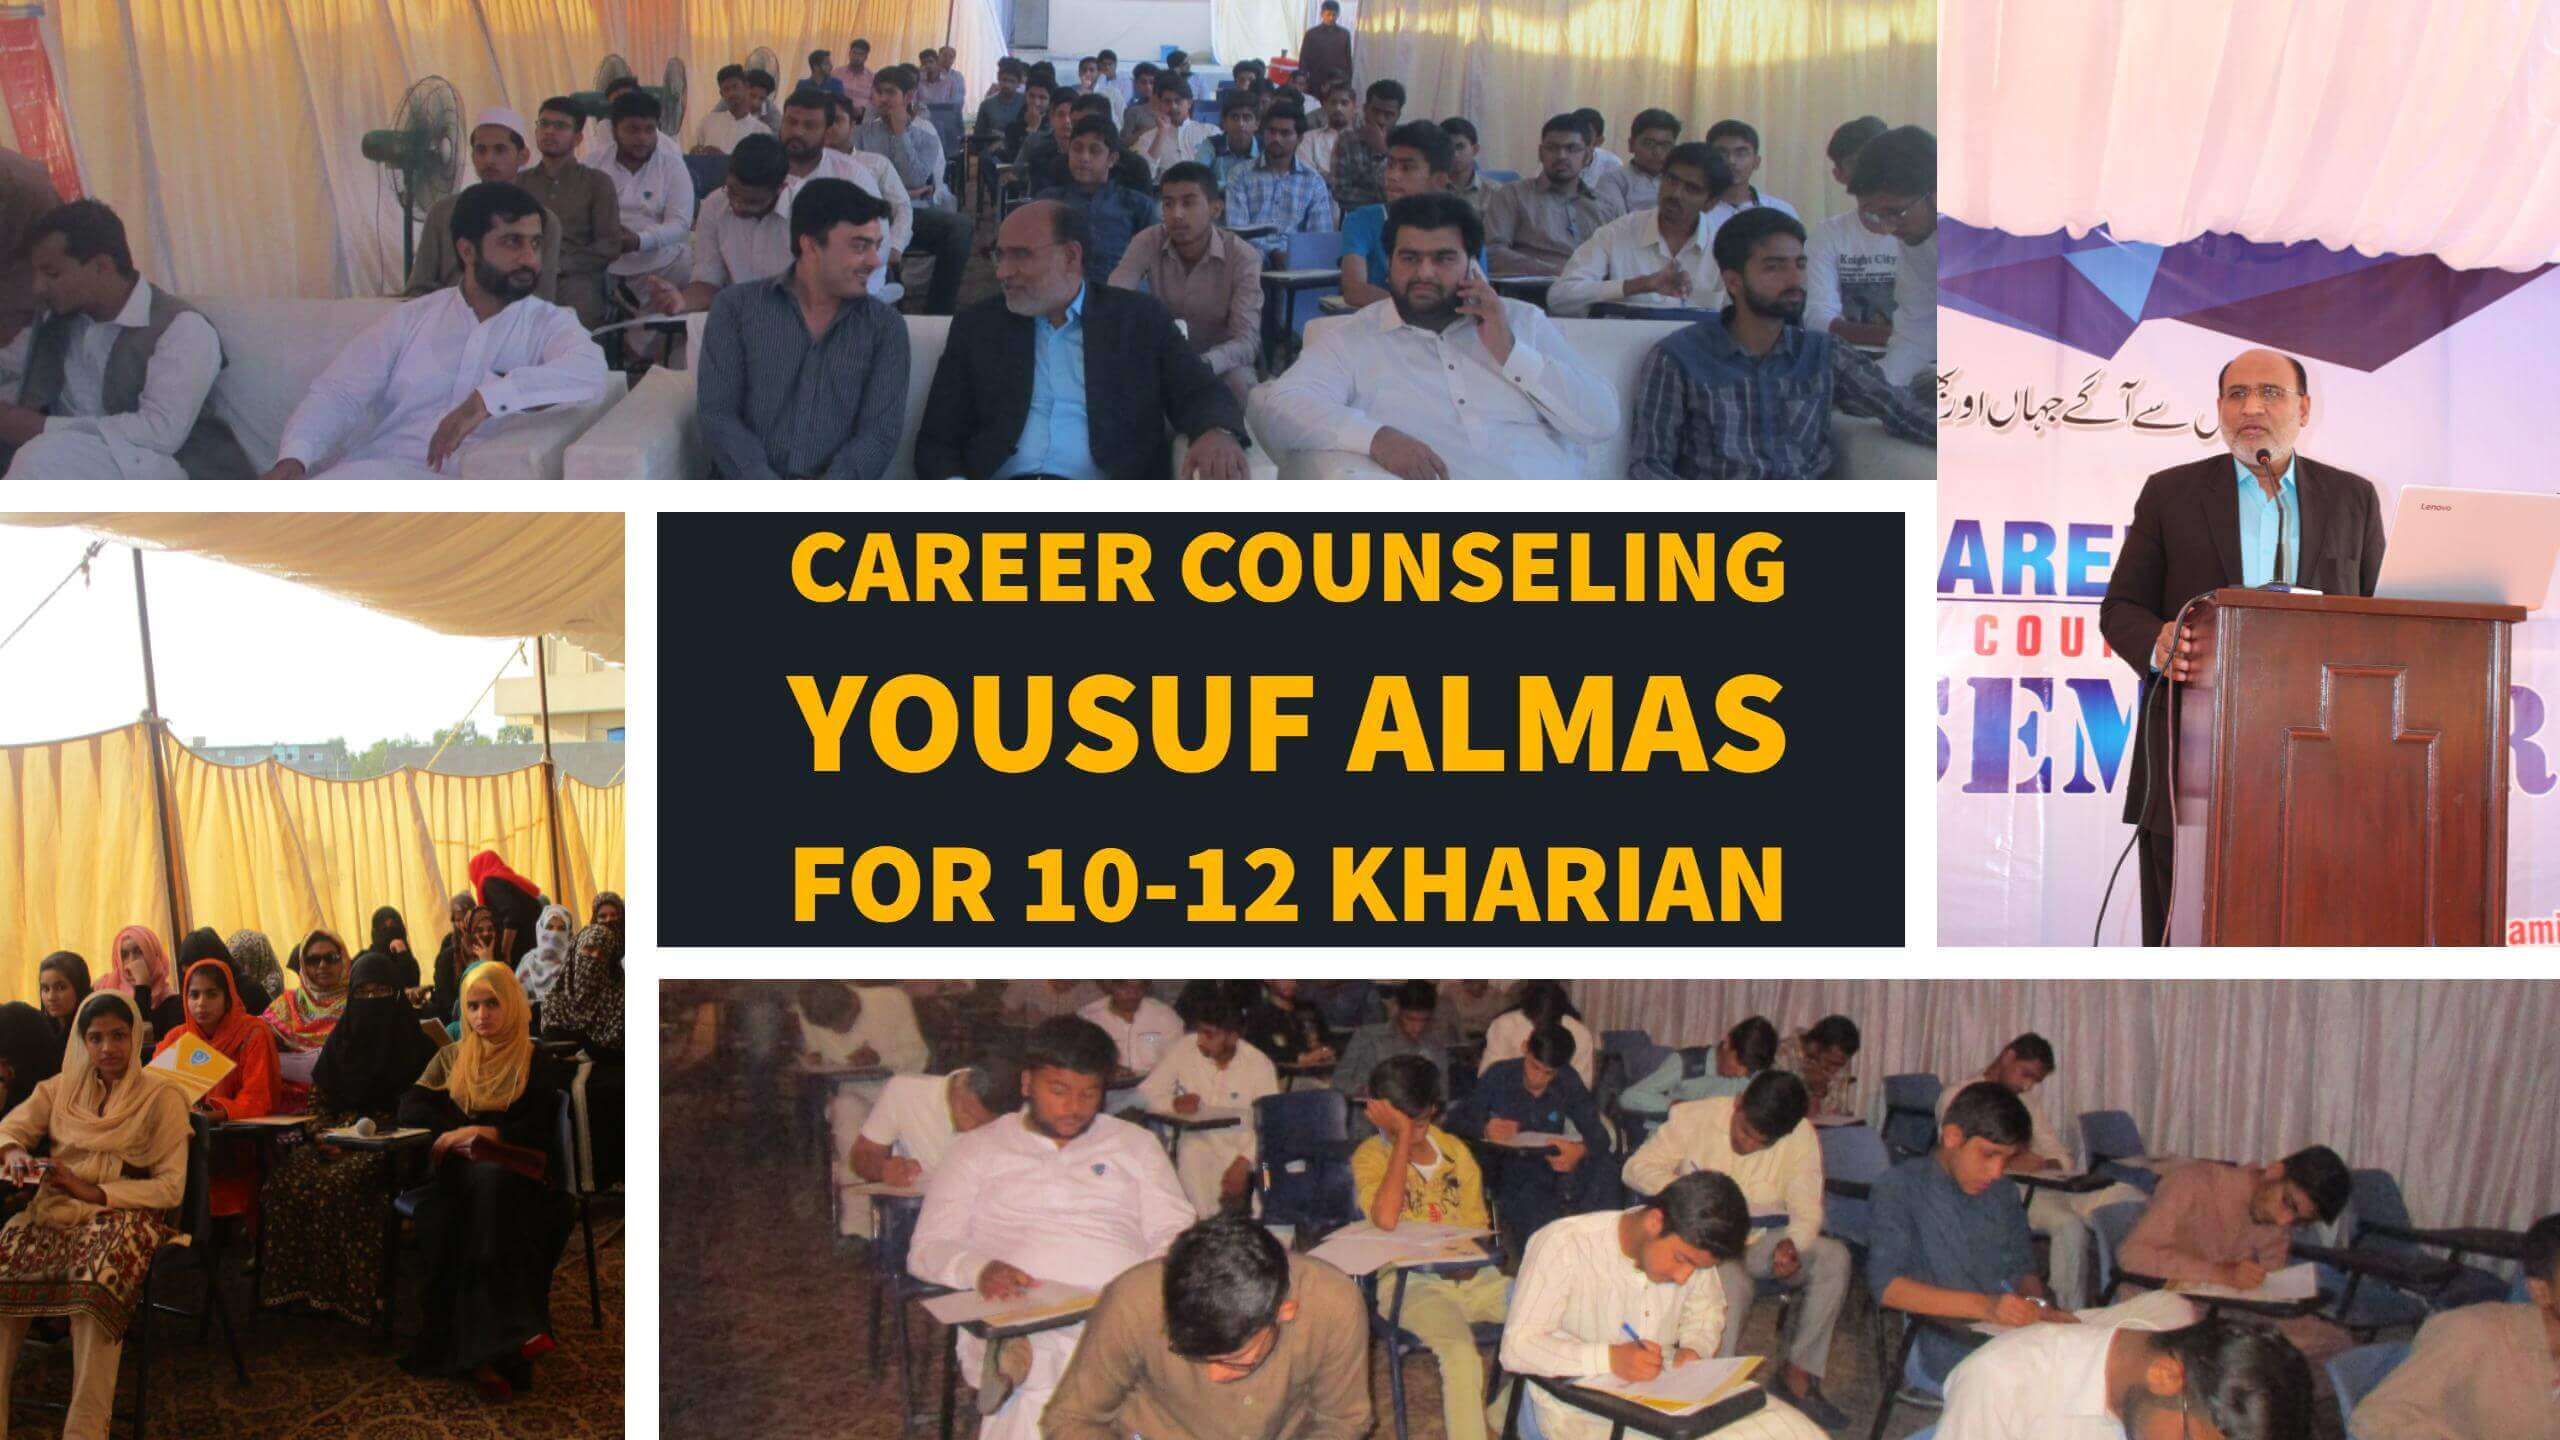 Seminar on Career Counseling in kharian